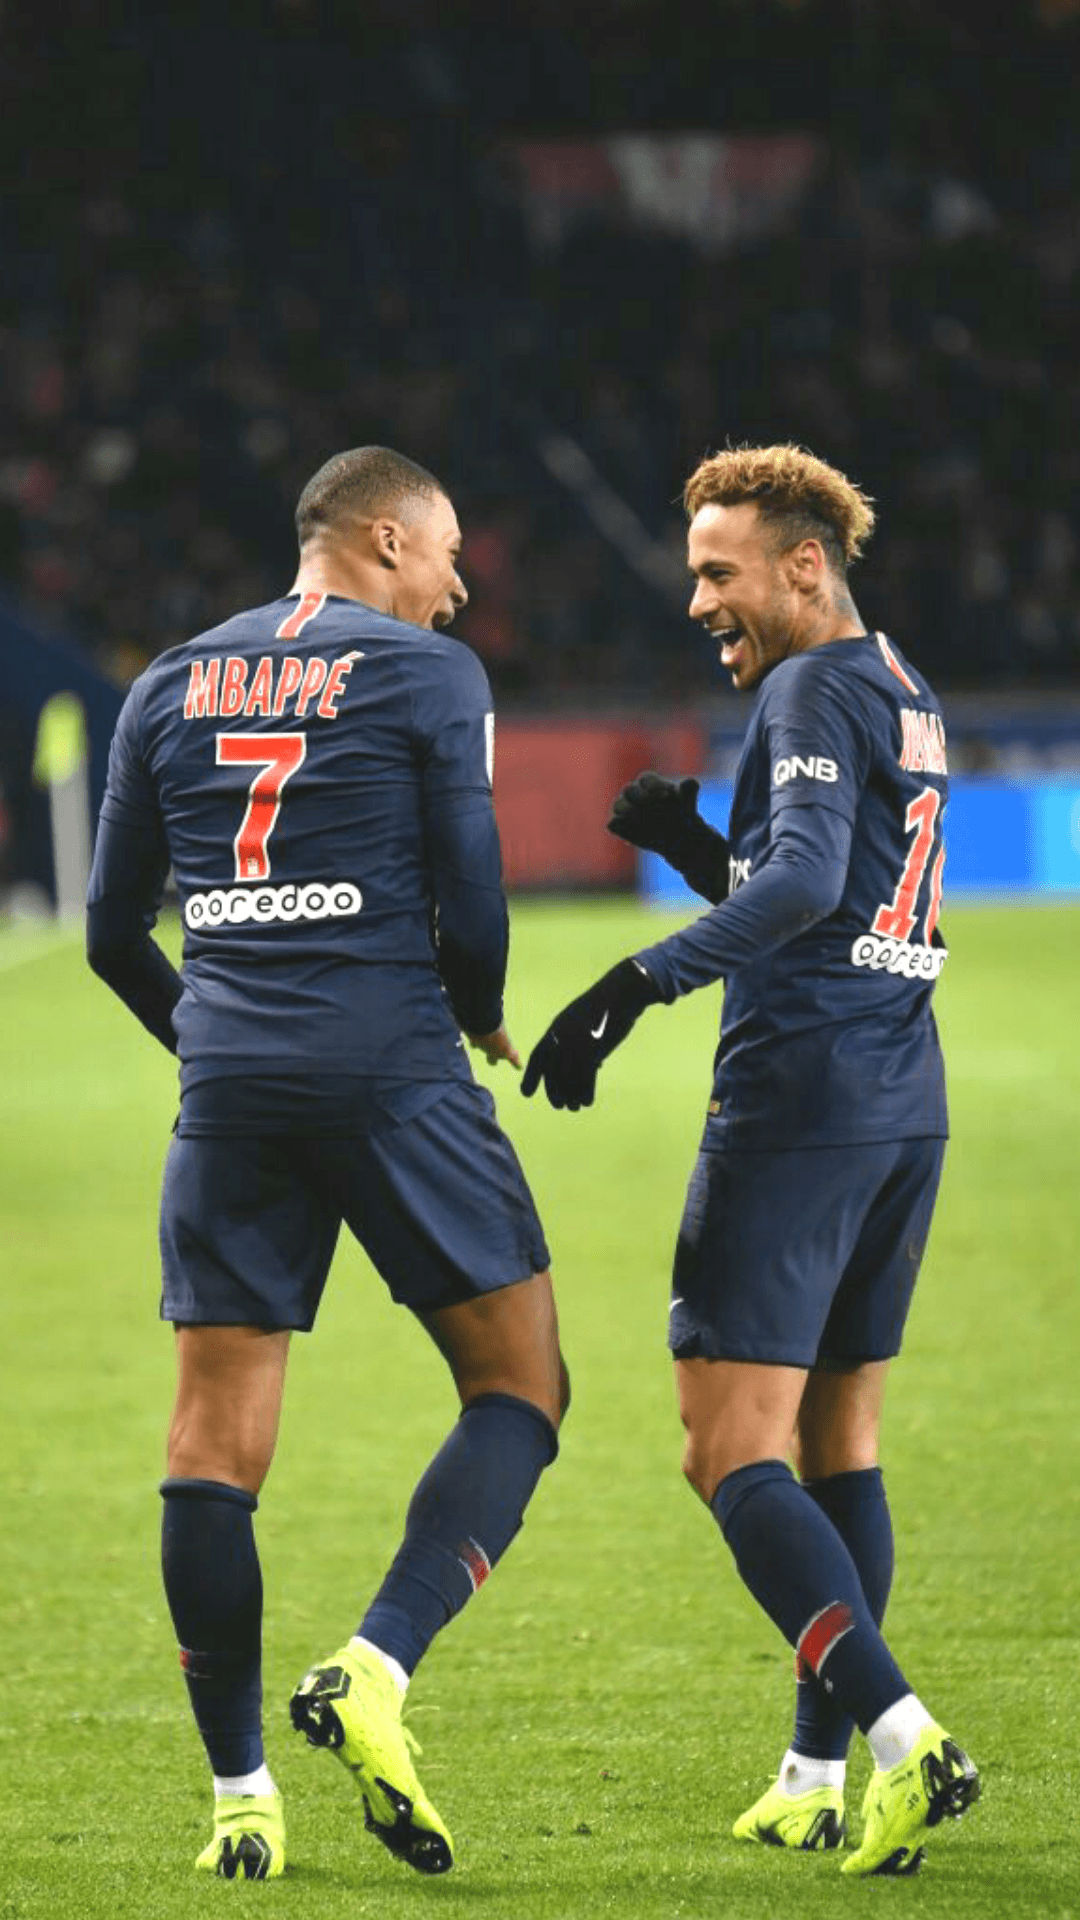 Neymar and Mbappe Wallpapers - Top Free Neymar and Mbappe ...